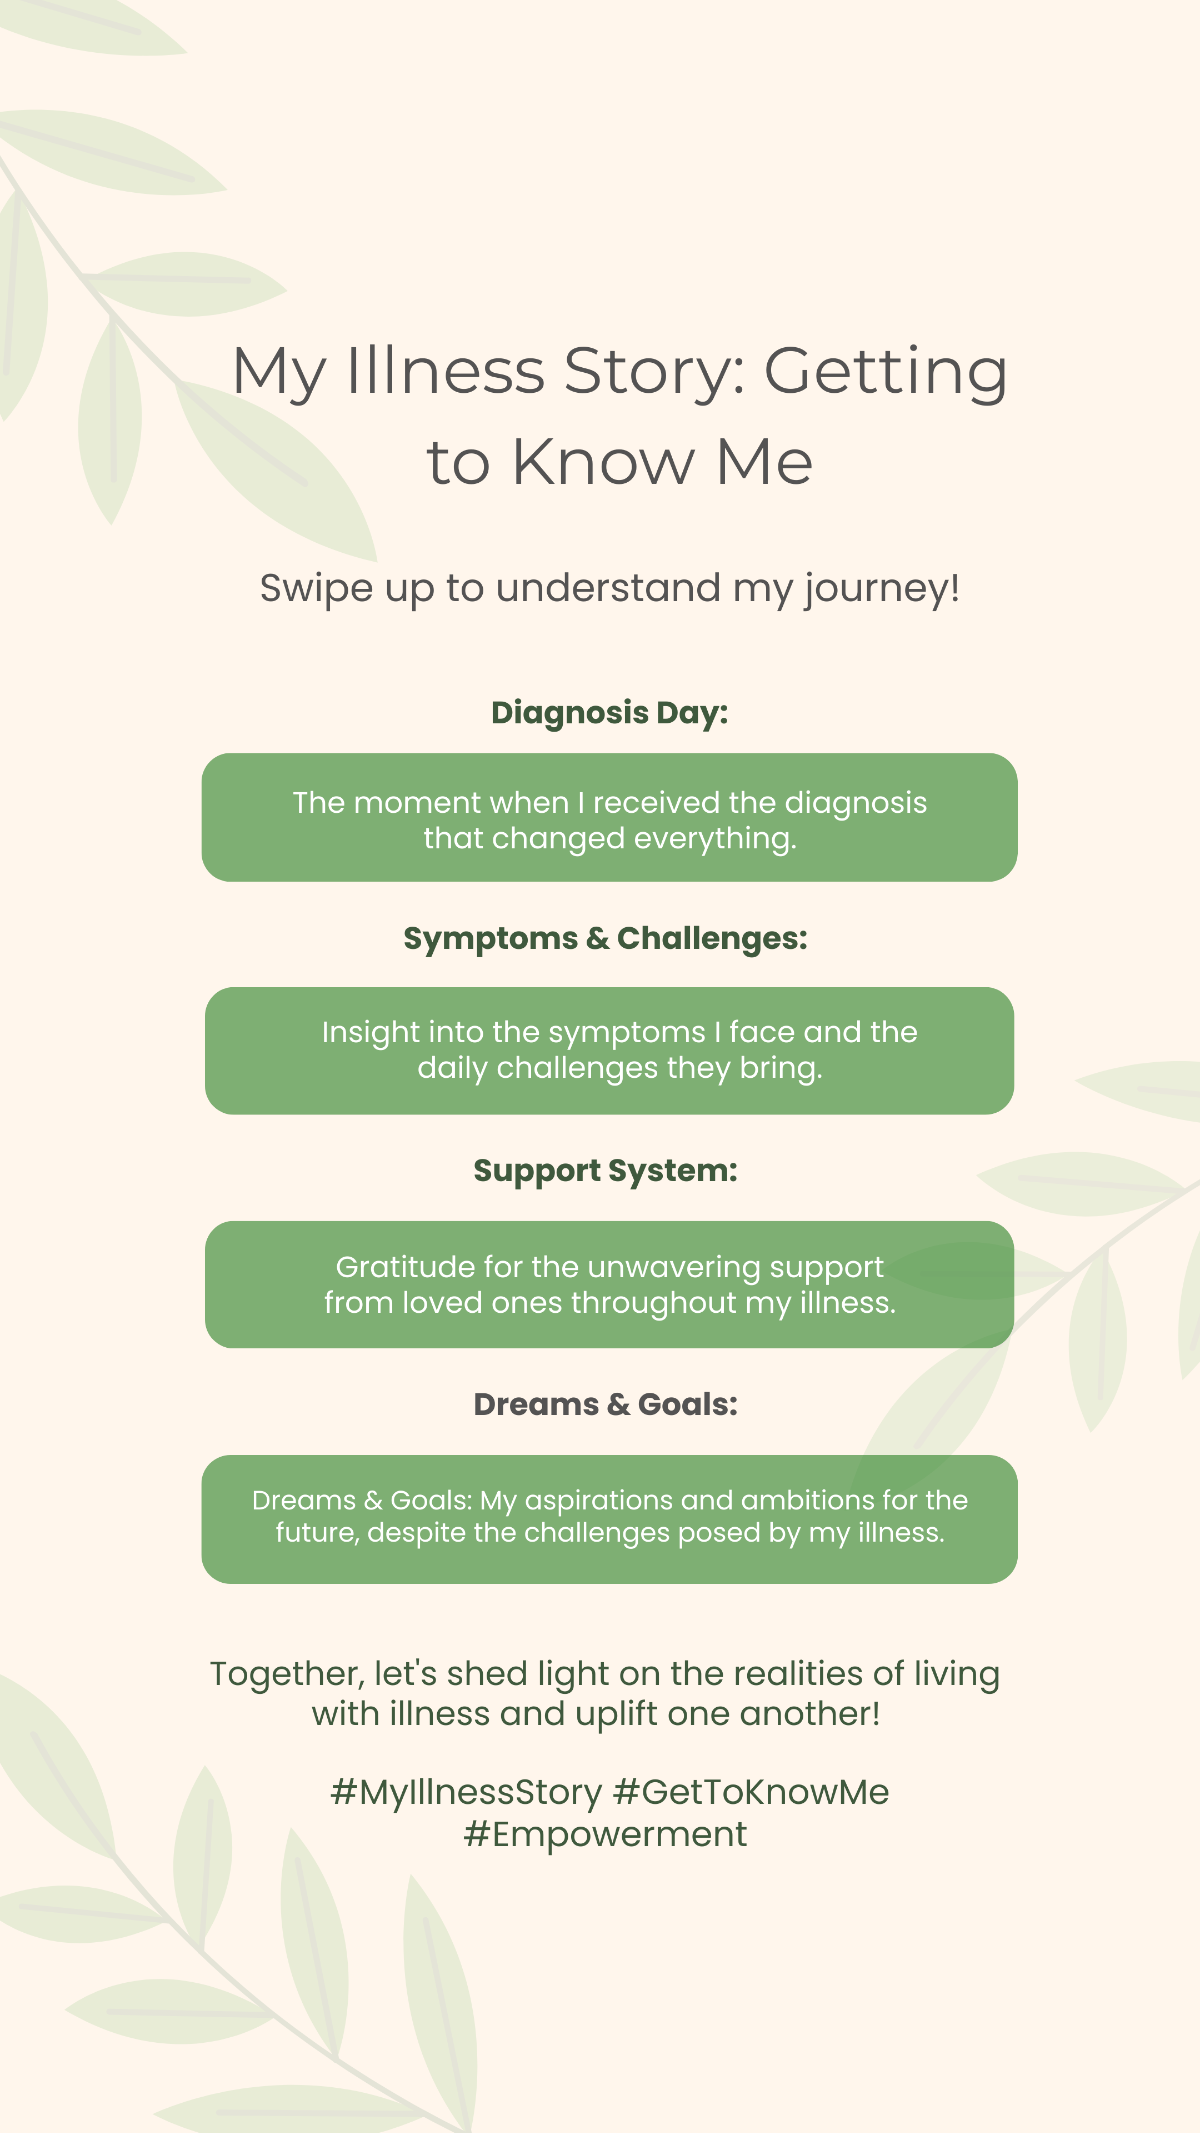 Get to Know Me My Illness Story Template